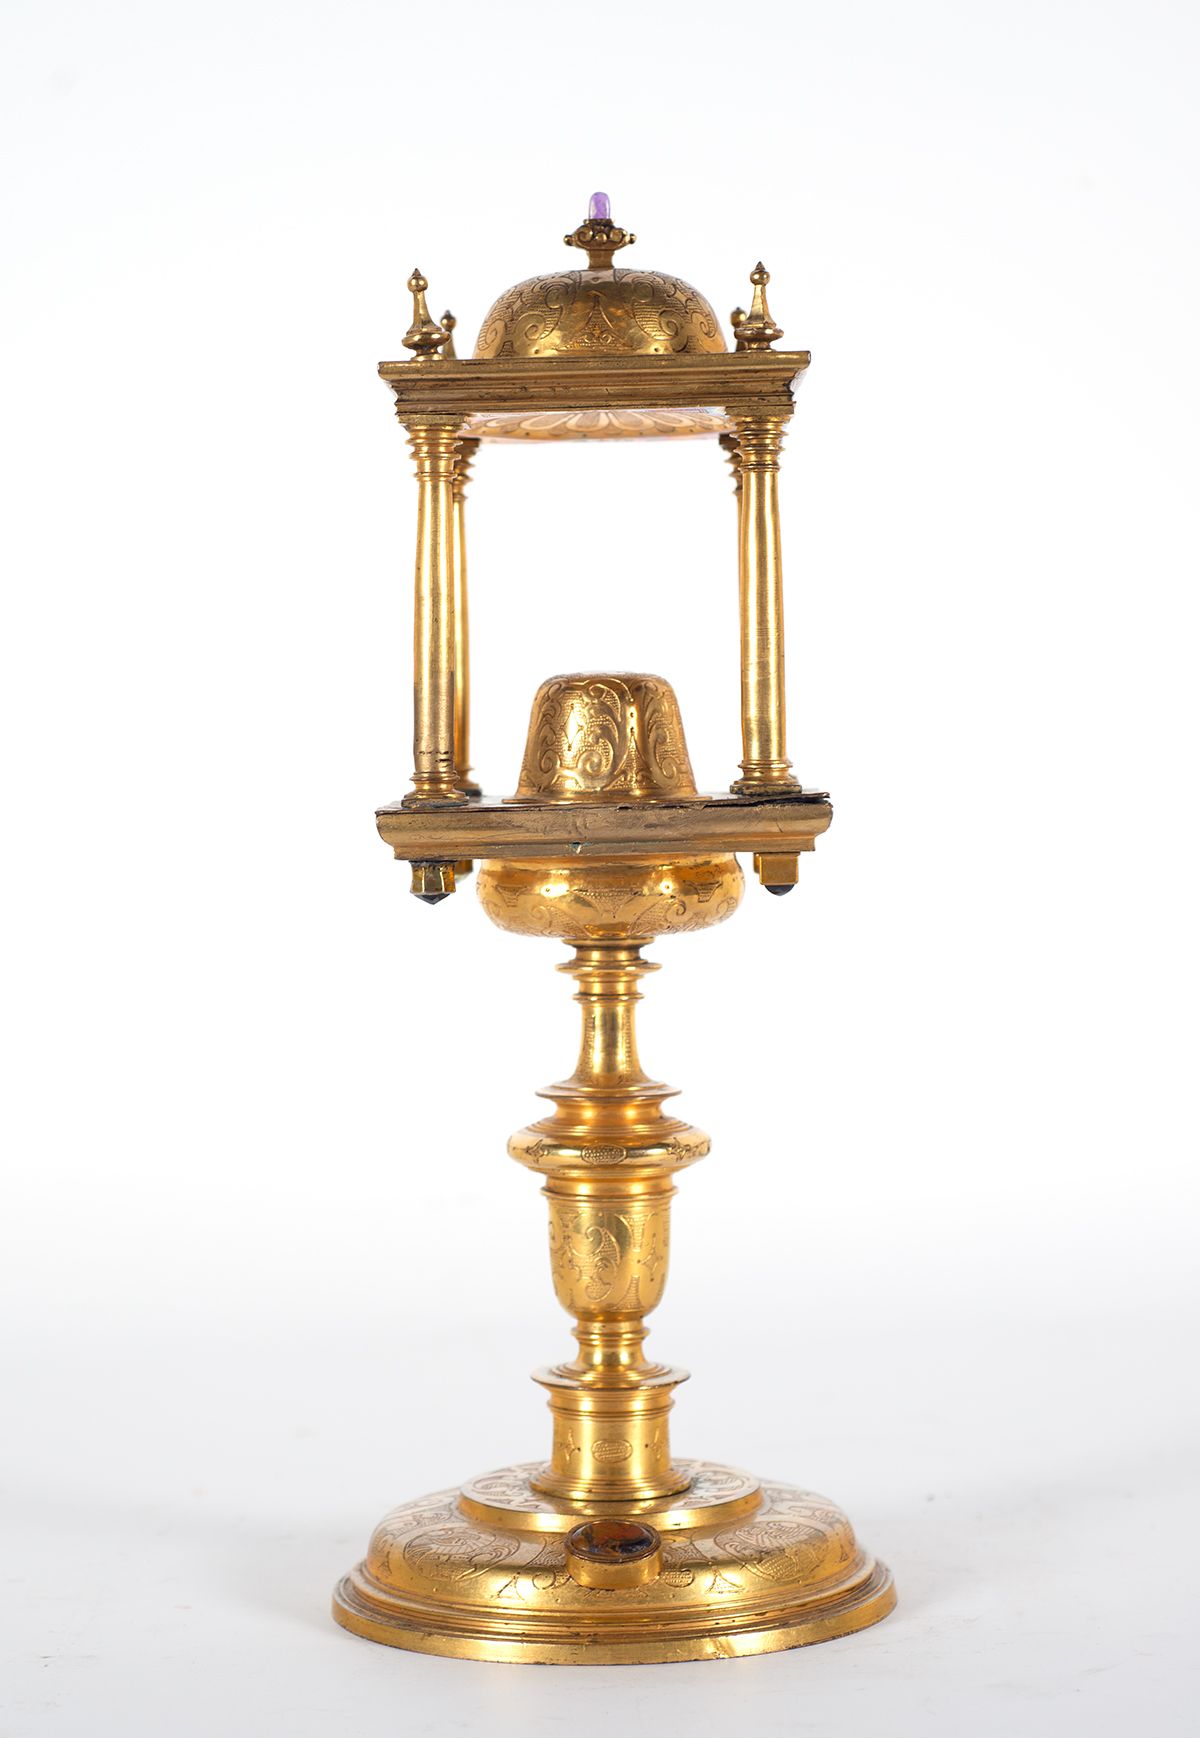 Important monstrance in gilded bronze from the 16th century Misure: 37 x 11 cm